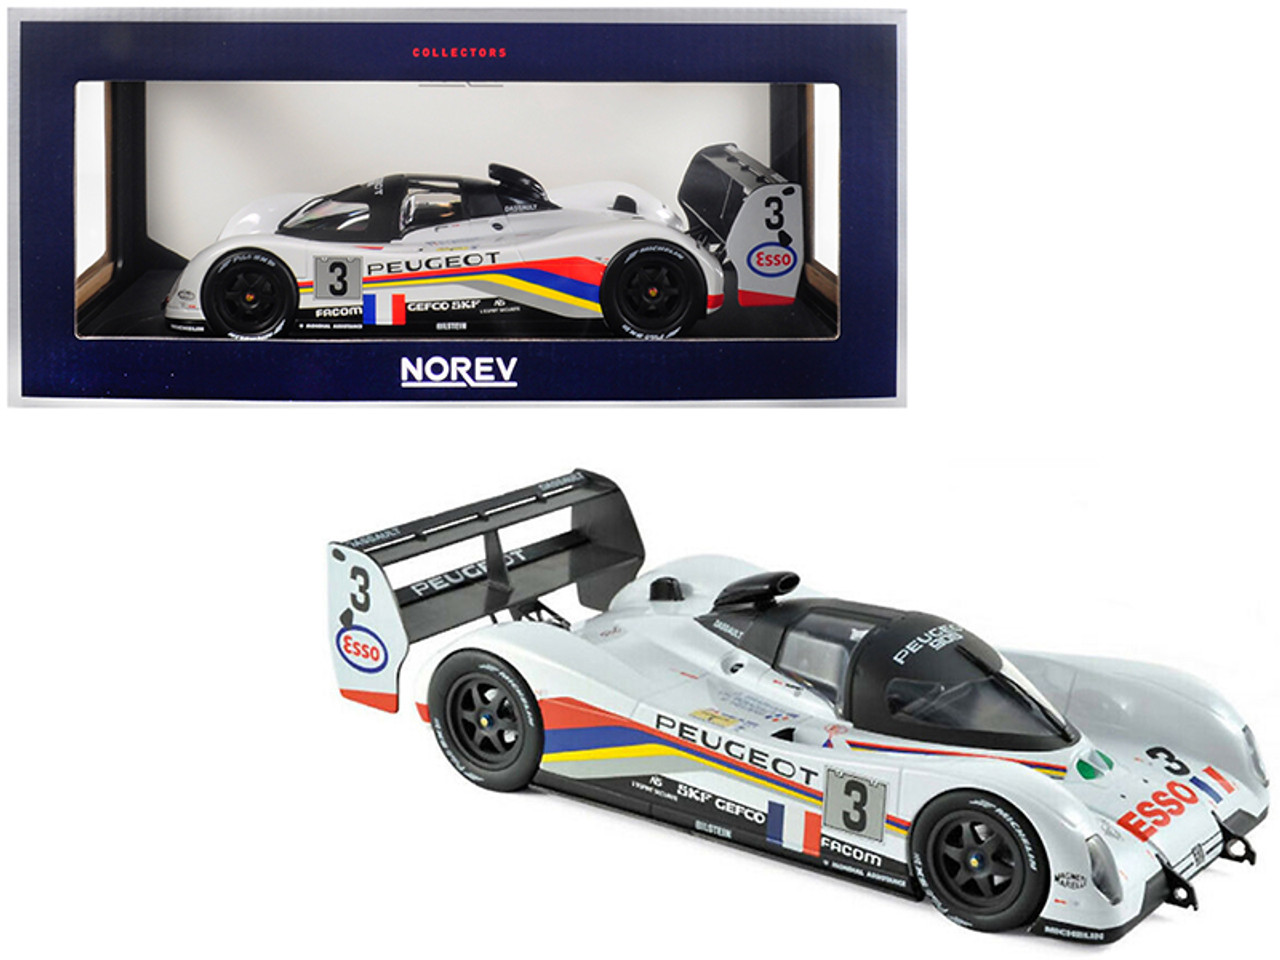 Peugeot 905 #3 Bouchut / Helary / Brabham Winners 24 Hours of Le Mans France 1993 1/18 Diecast Model Car by Norev